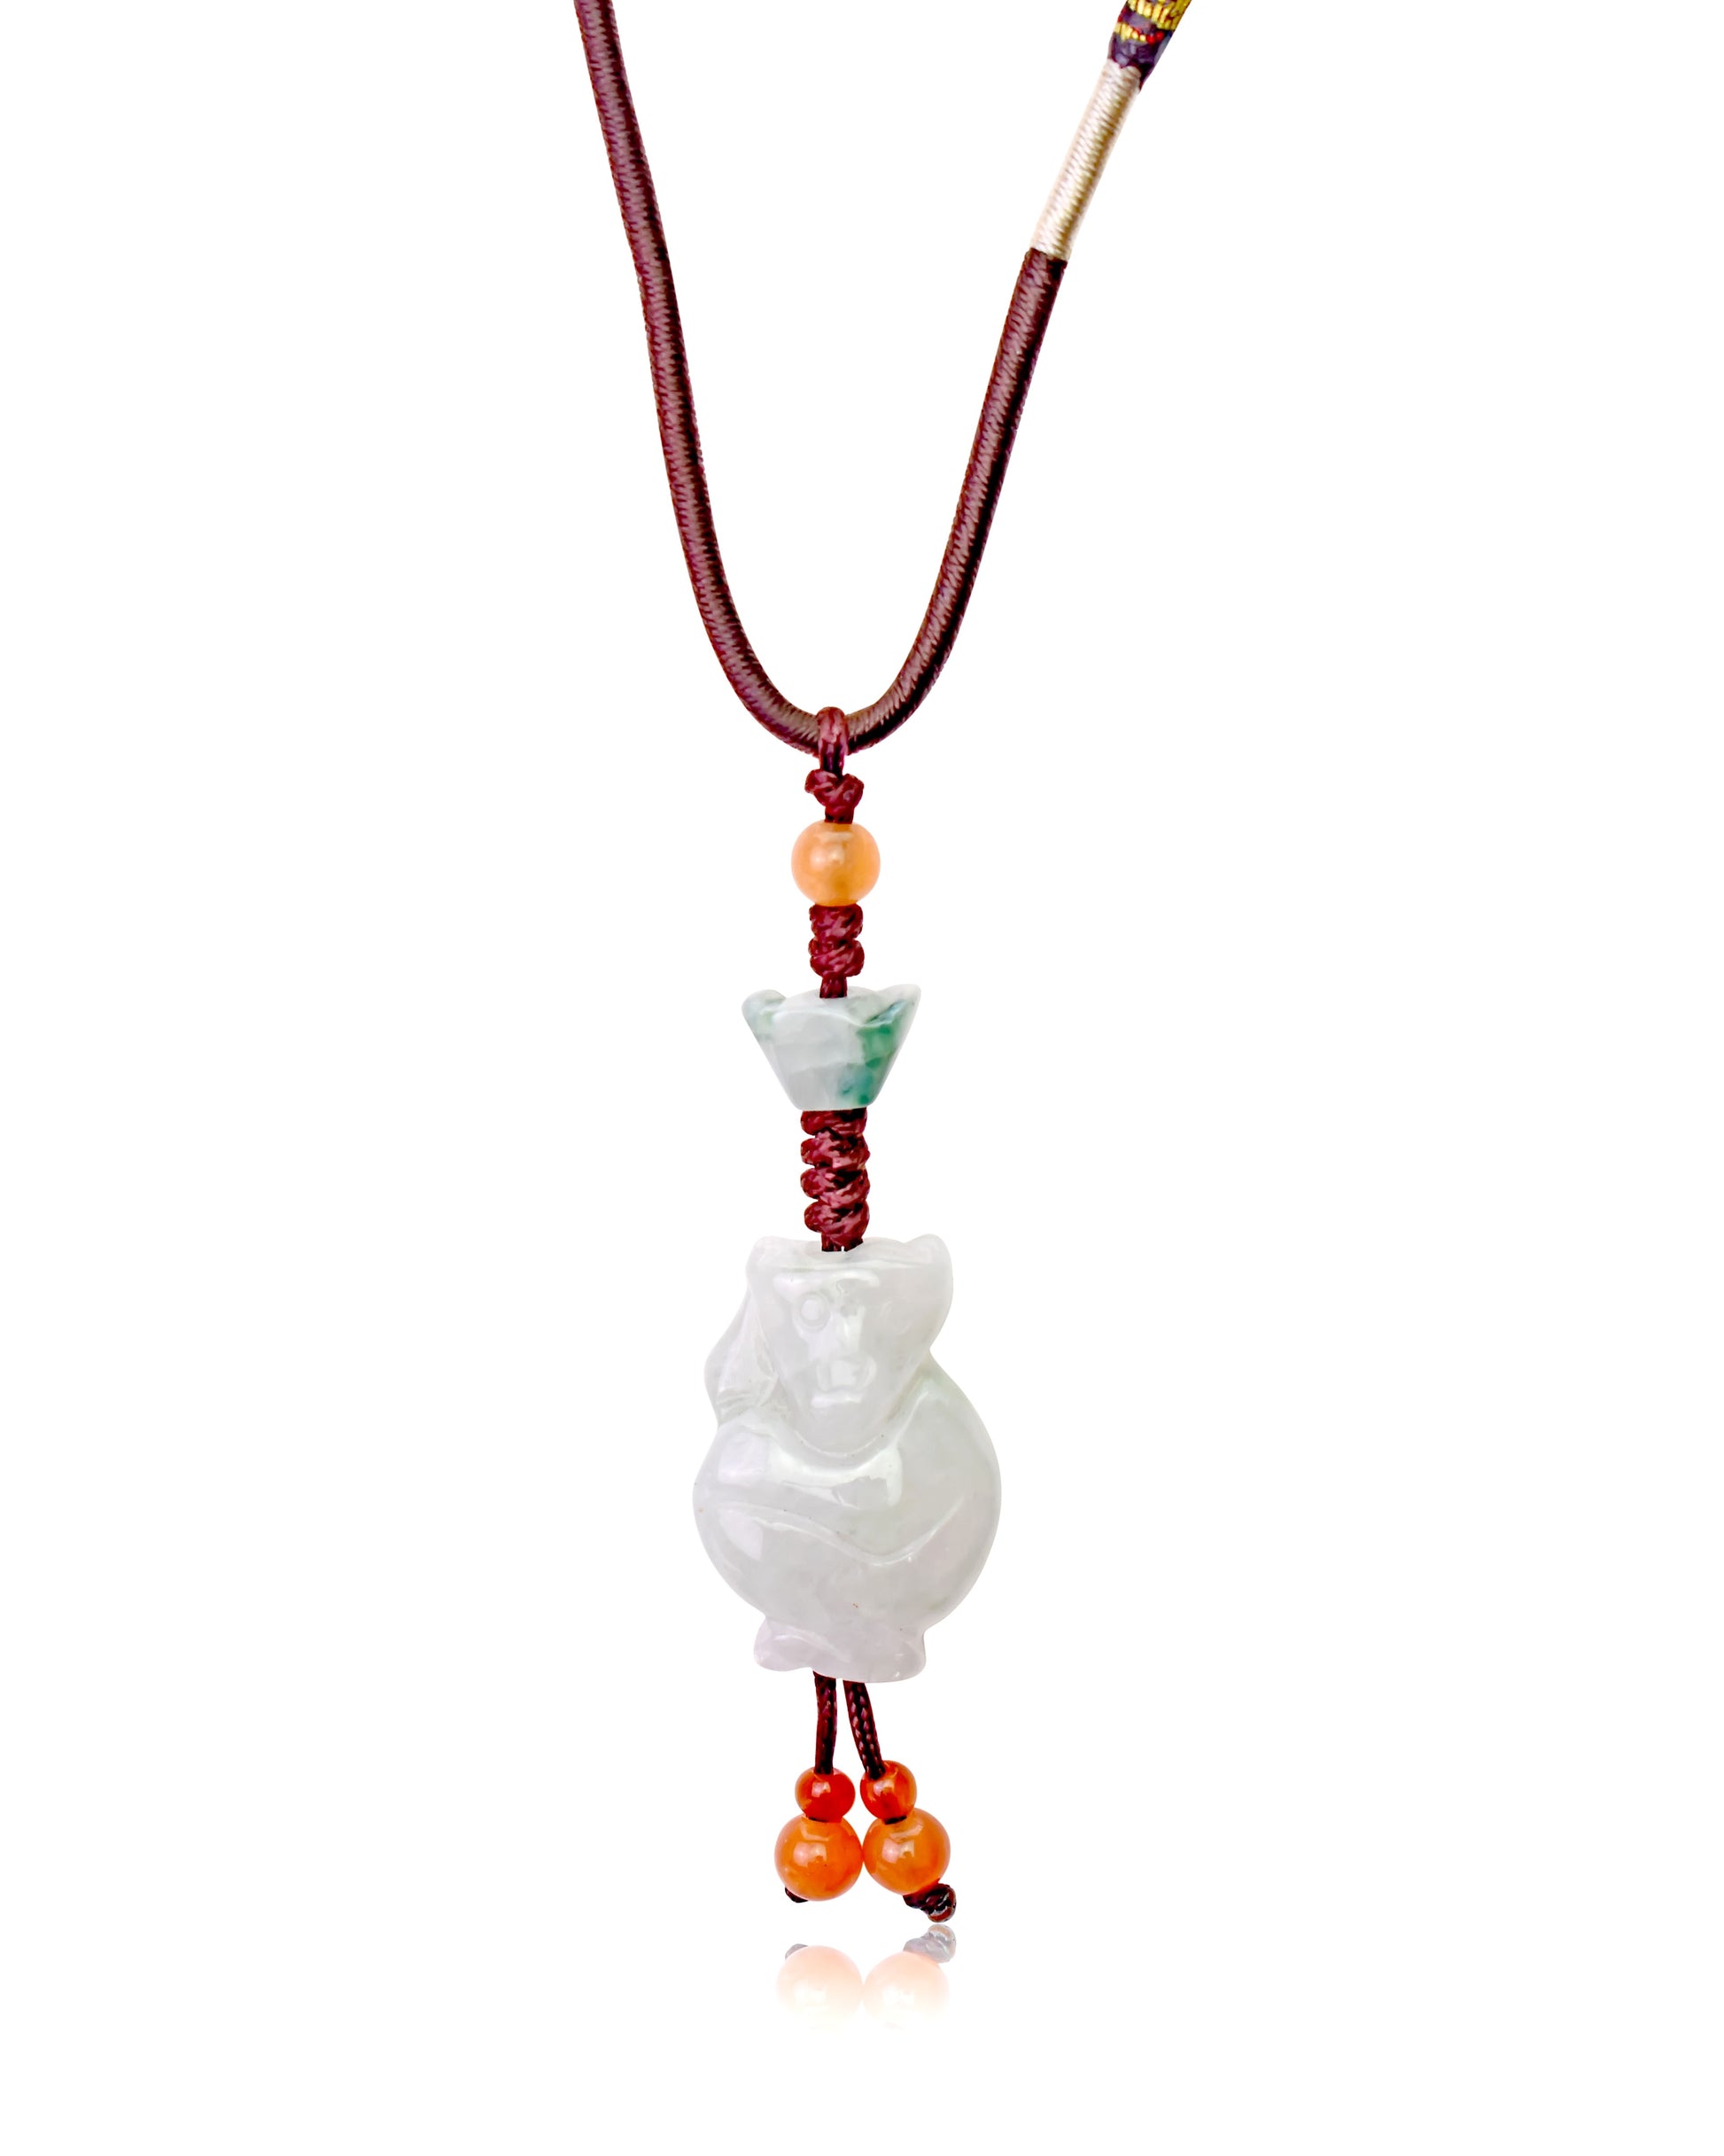 Stand Out with a Unique Monkey Jade Pendant Necklace